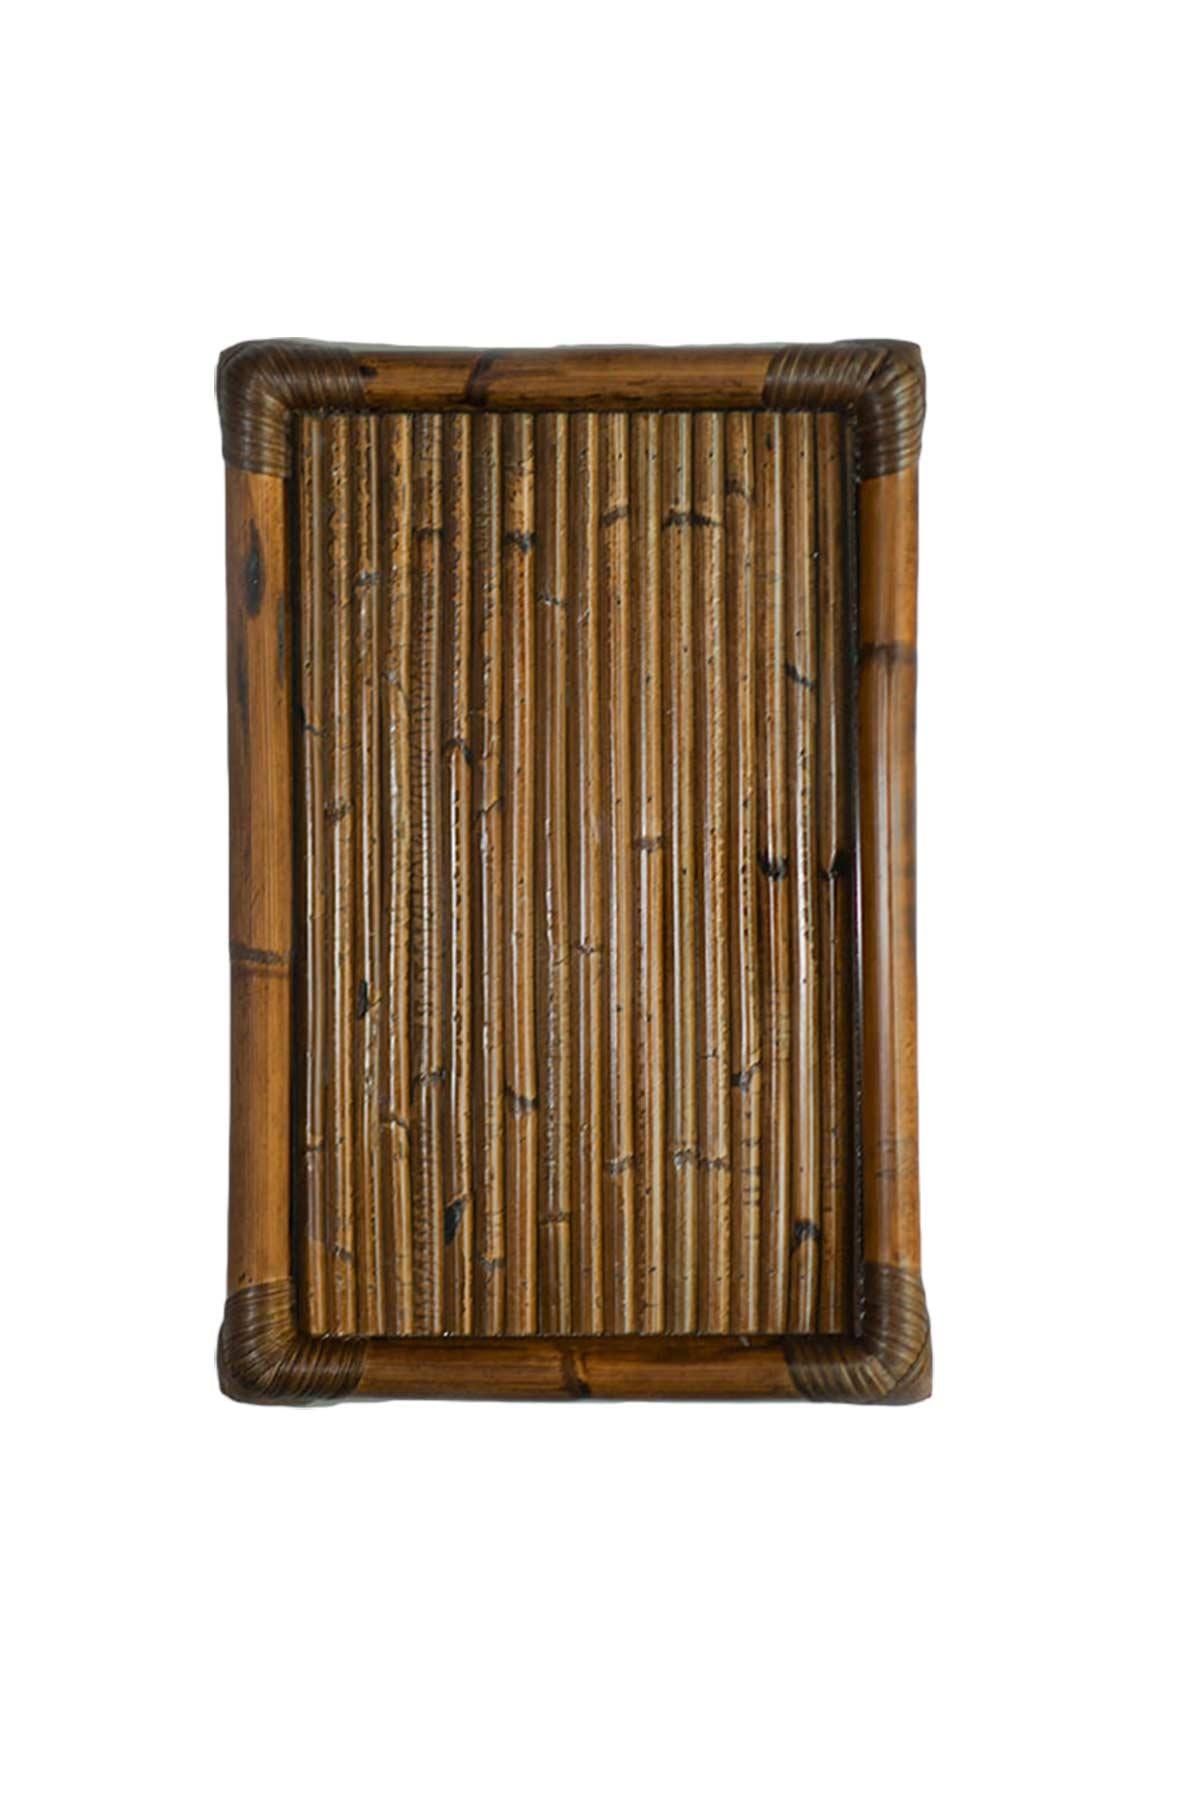 “Molto Editions” rectangular bamboo tray. Italian artisanal production.
Dimensions: 40 W x 4 H x 26 D cm
Materials: bamboo.
Other size available see our storefront or contact us for more informations.